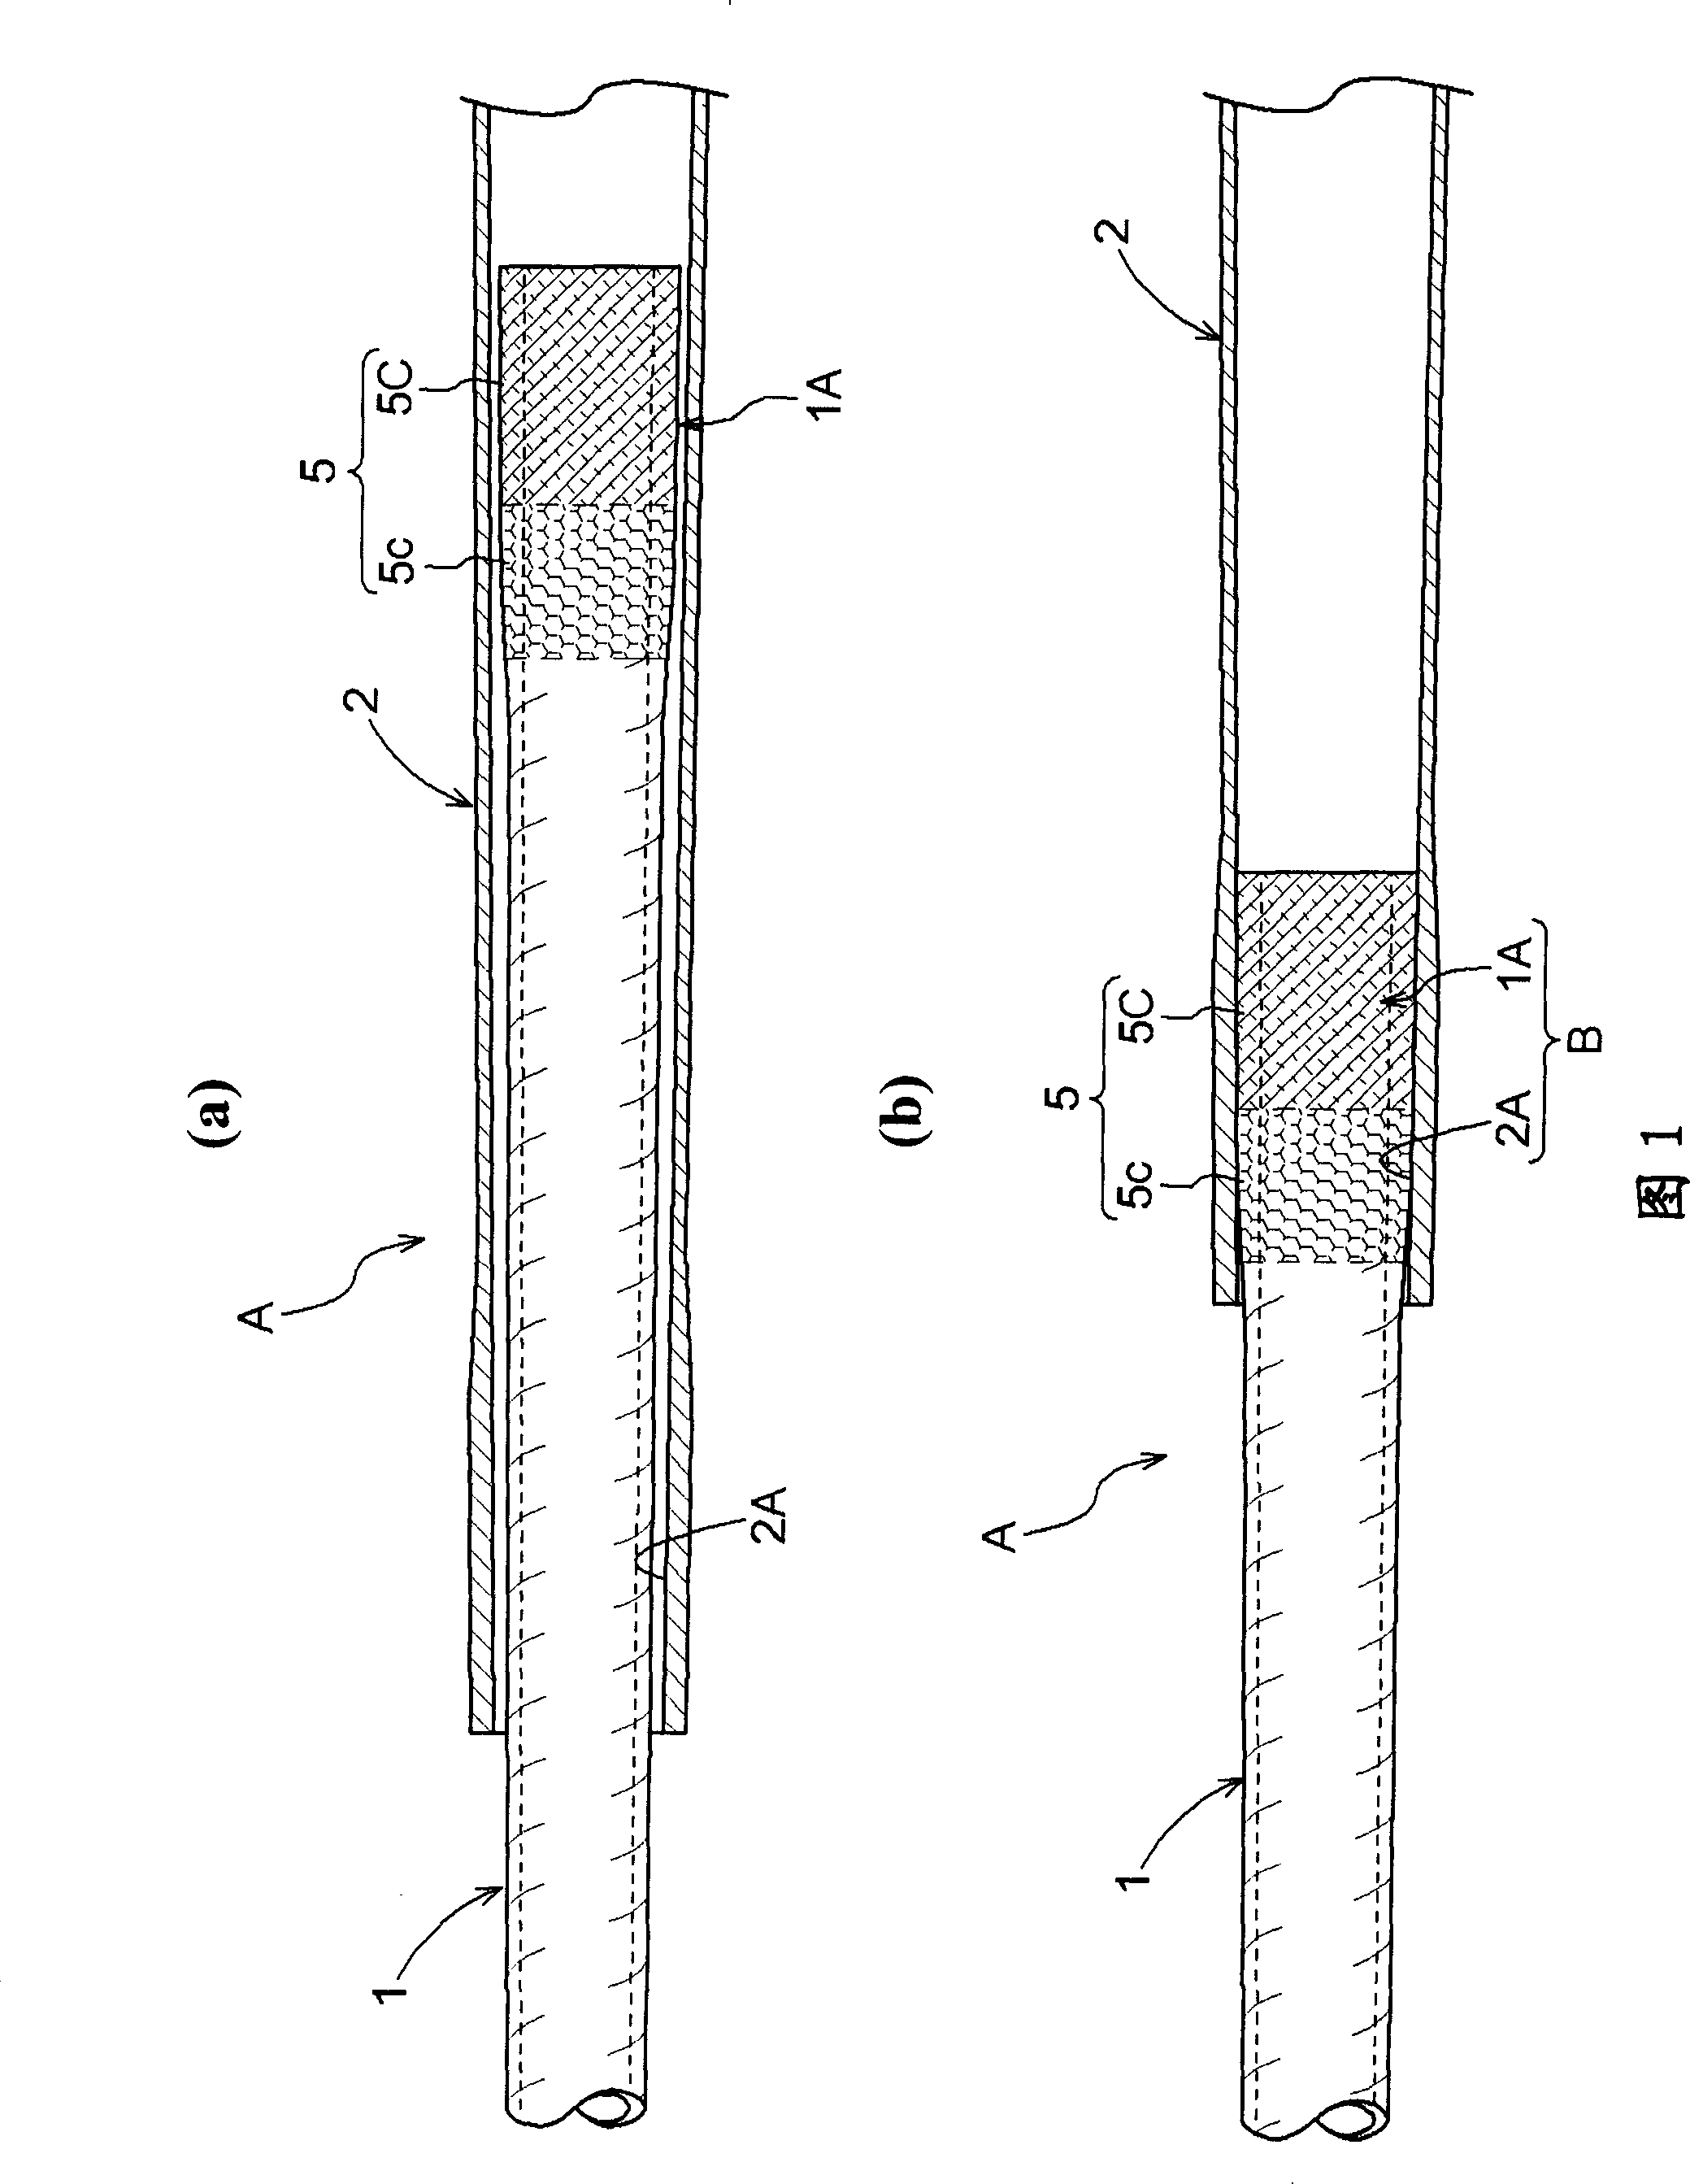 Rod of fishing pole and method for manufacturing same